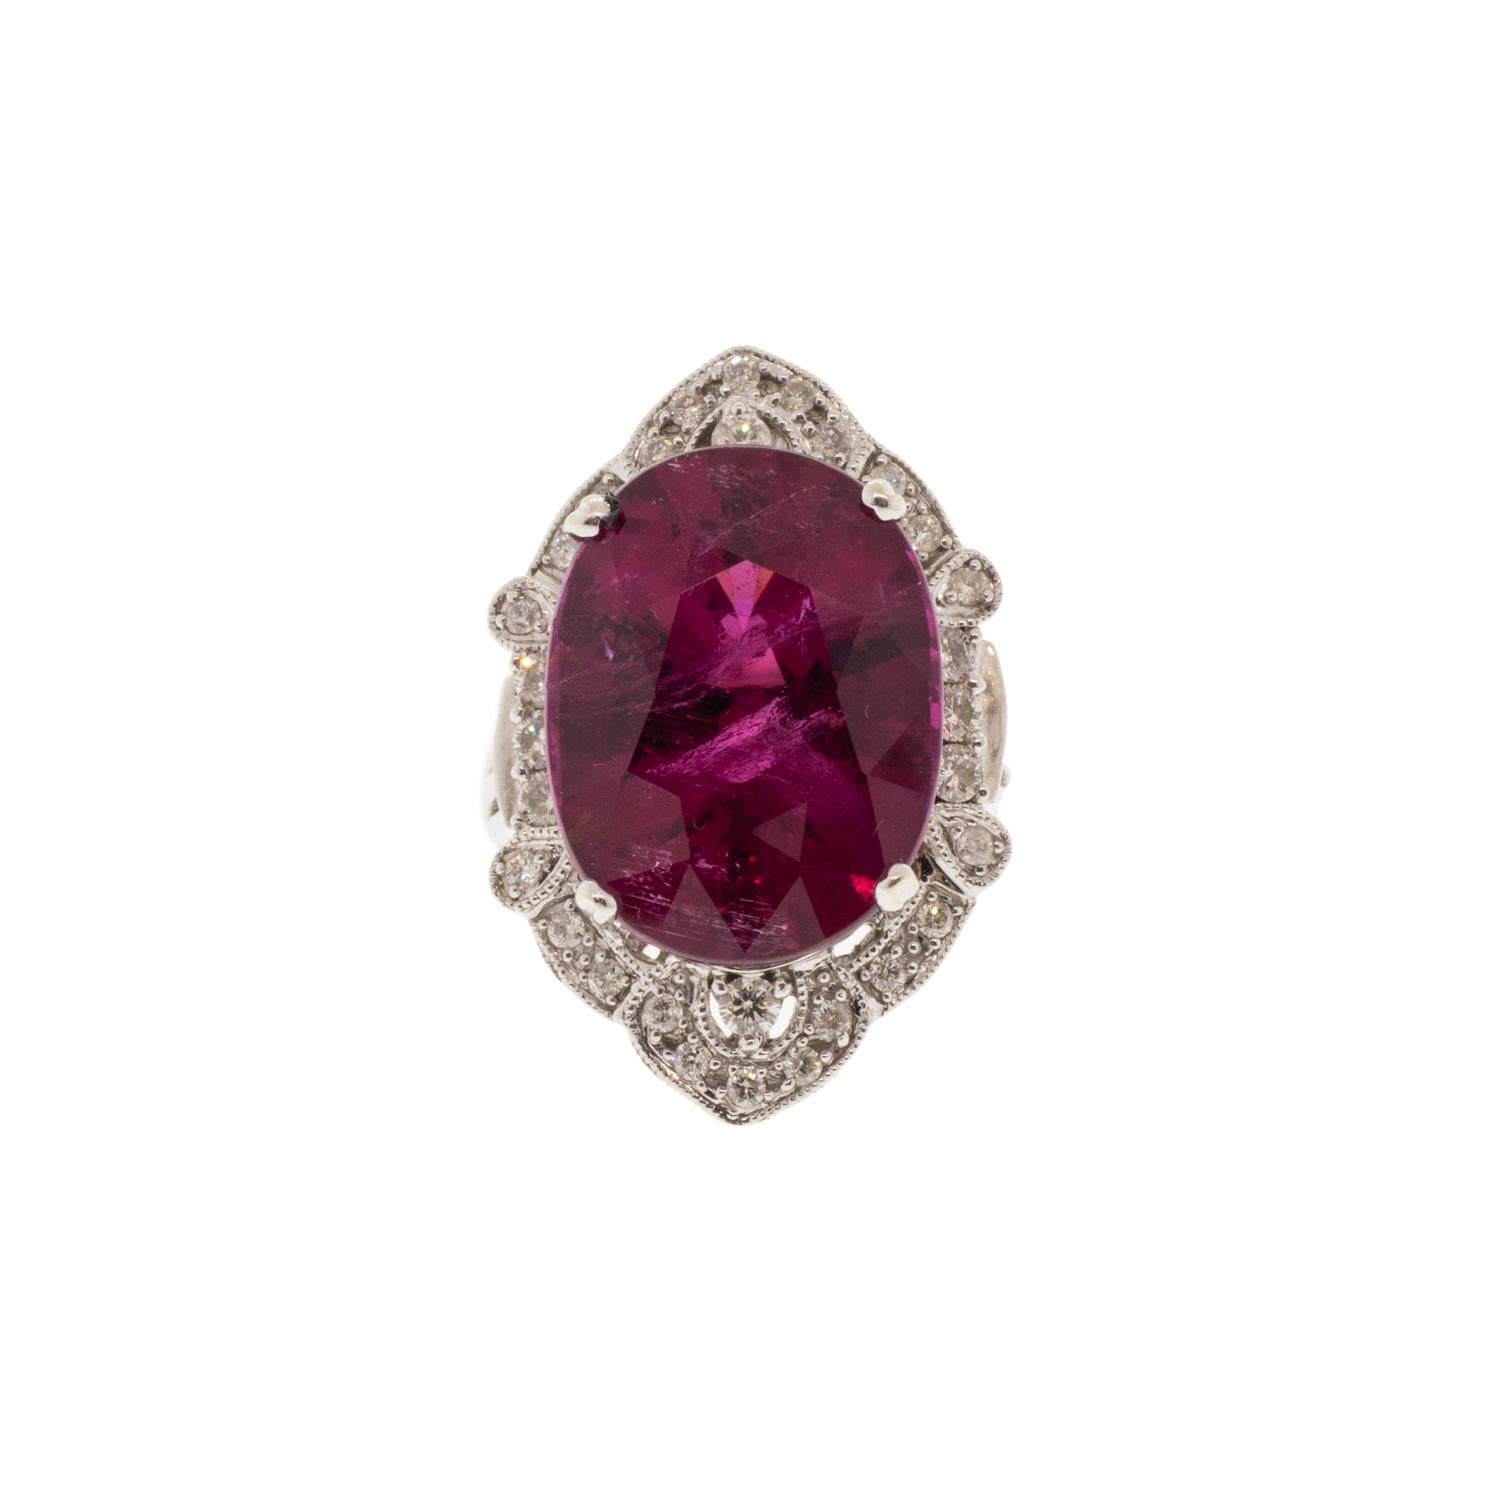 This 16.54ct natural rubellite tourmaline and diamond halo ring is a true showstopper. Crafted from 14k white gold, its vintage design is sure to make a unique addition to any jewelry collection. Its rubellite center stone is surrounded by a